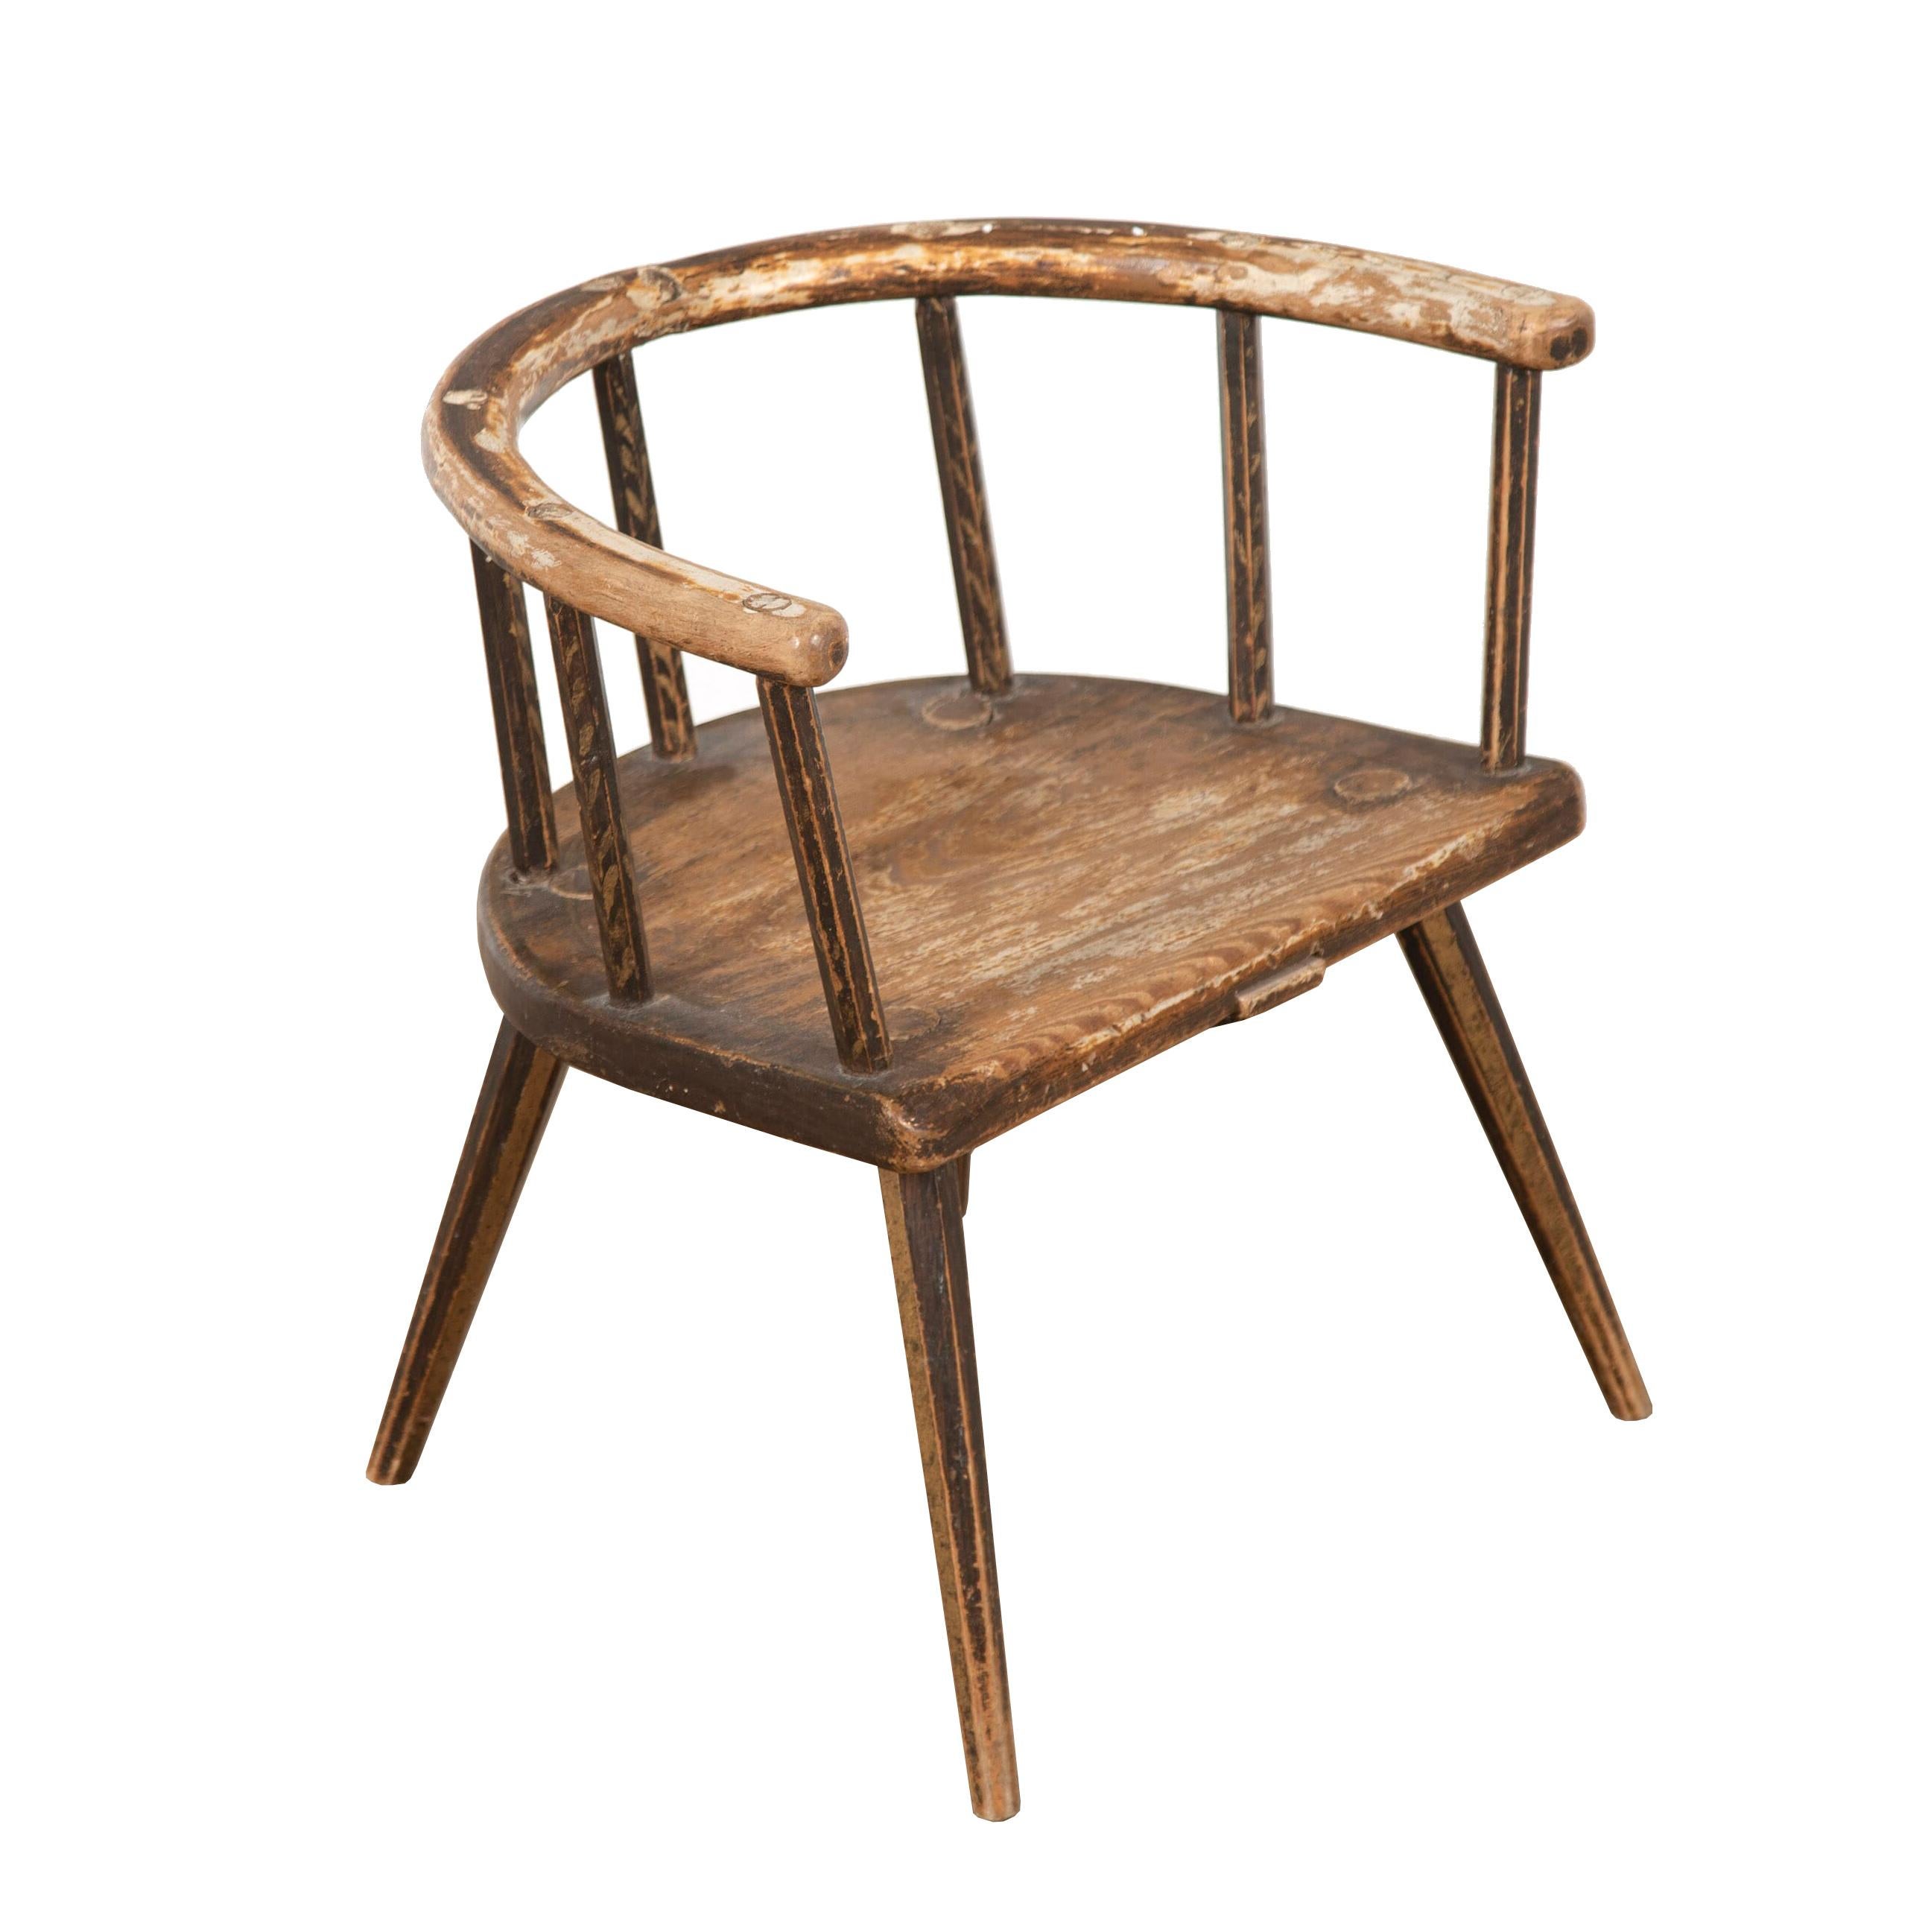 Charming 19th Century stick back child's chair. 
This wonderful chair is made from strong wood and has been painted to create a varnished finish. The paint-work is original to the piece and is beautifully distressed. 
This chair has a great patina